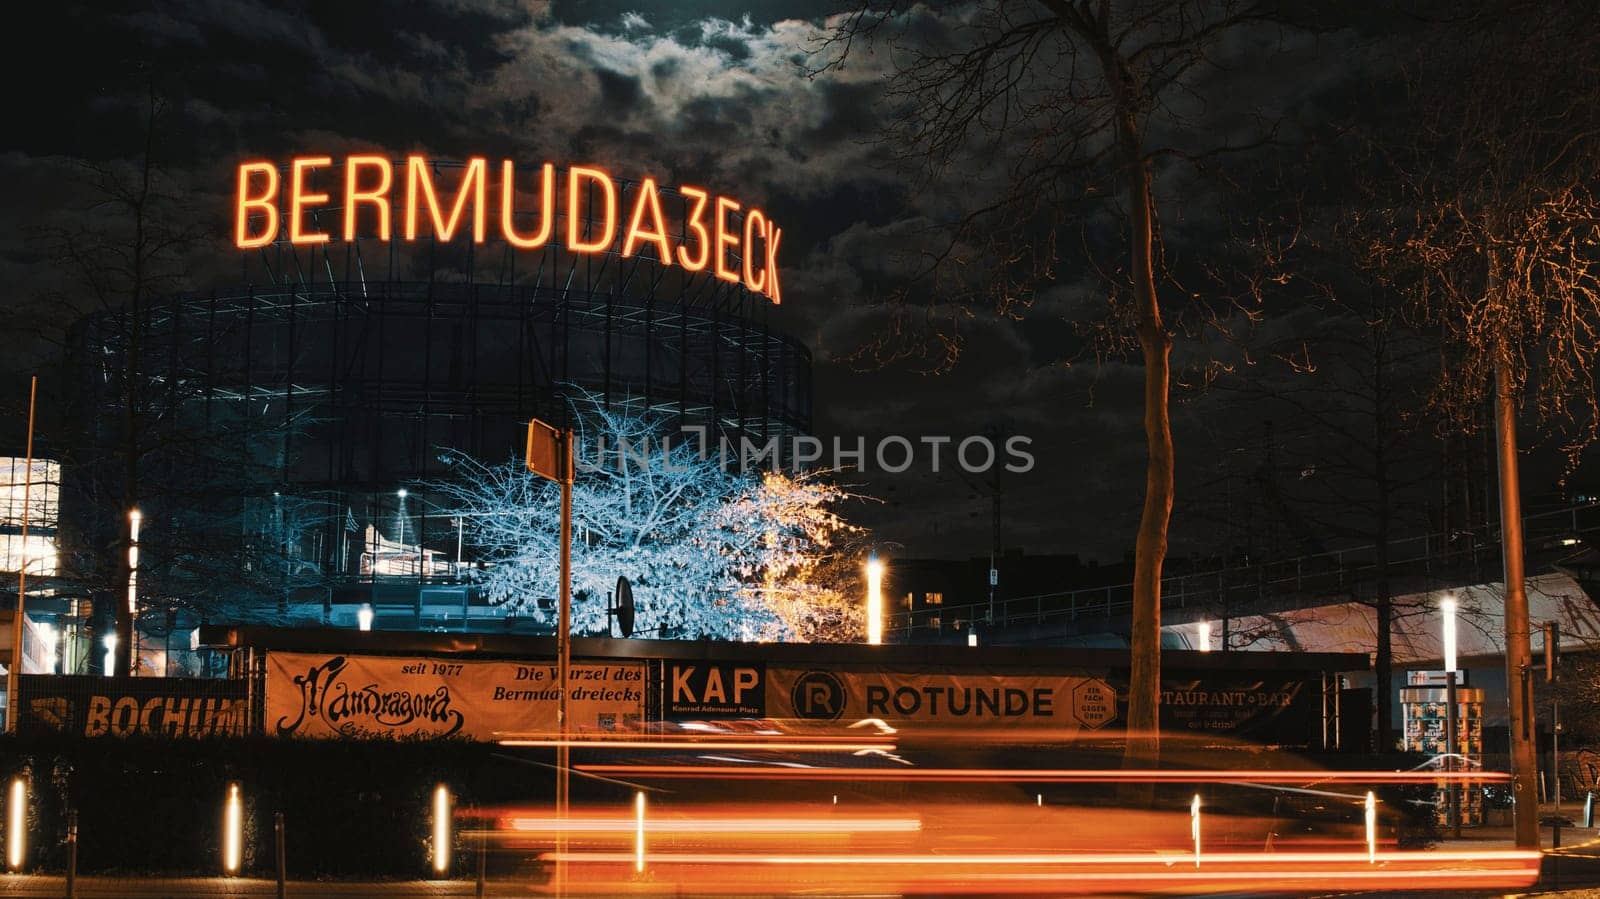 Low angle shot of an illuminated sign of the Bermuda3eck, Bermuda Triangle, in Bochum, Germany